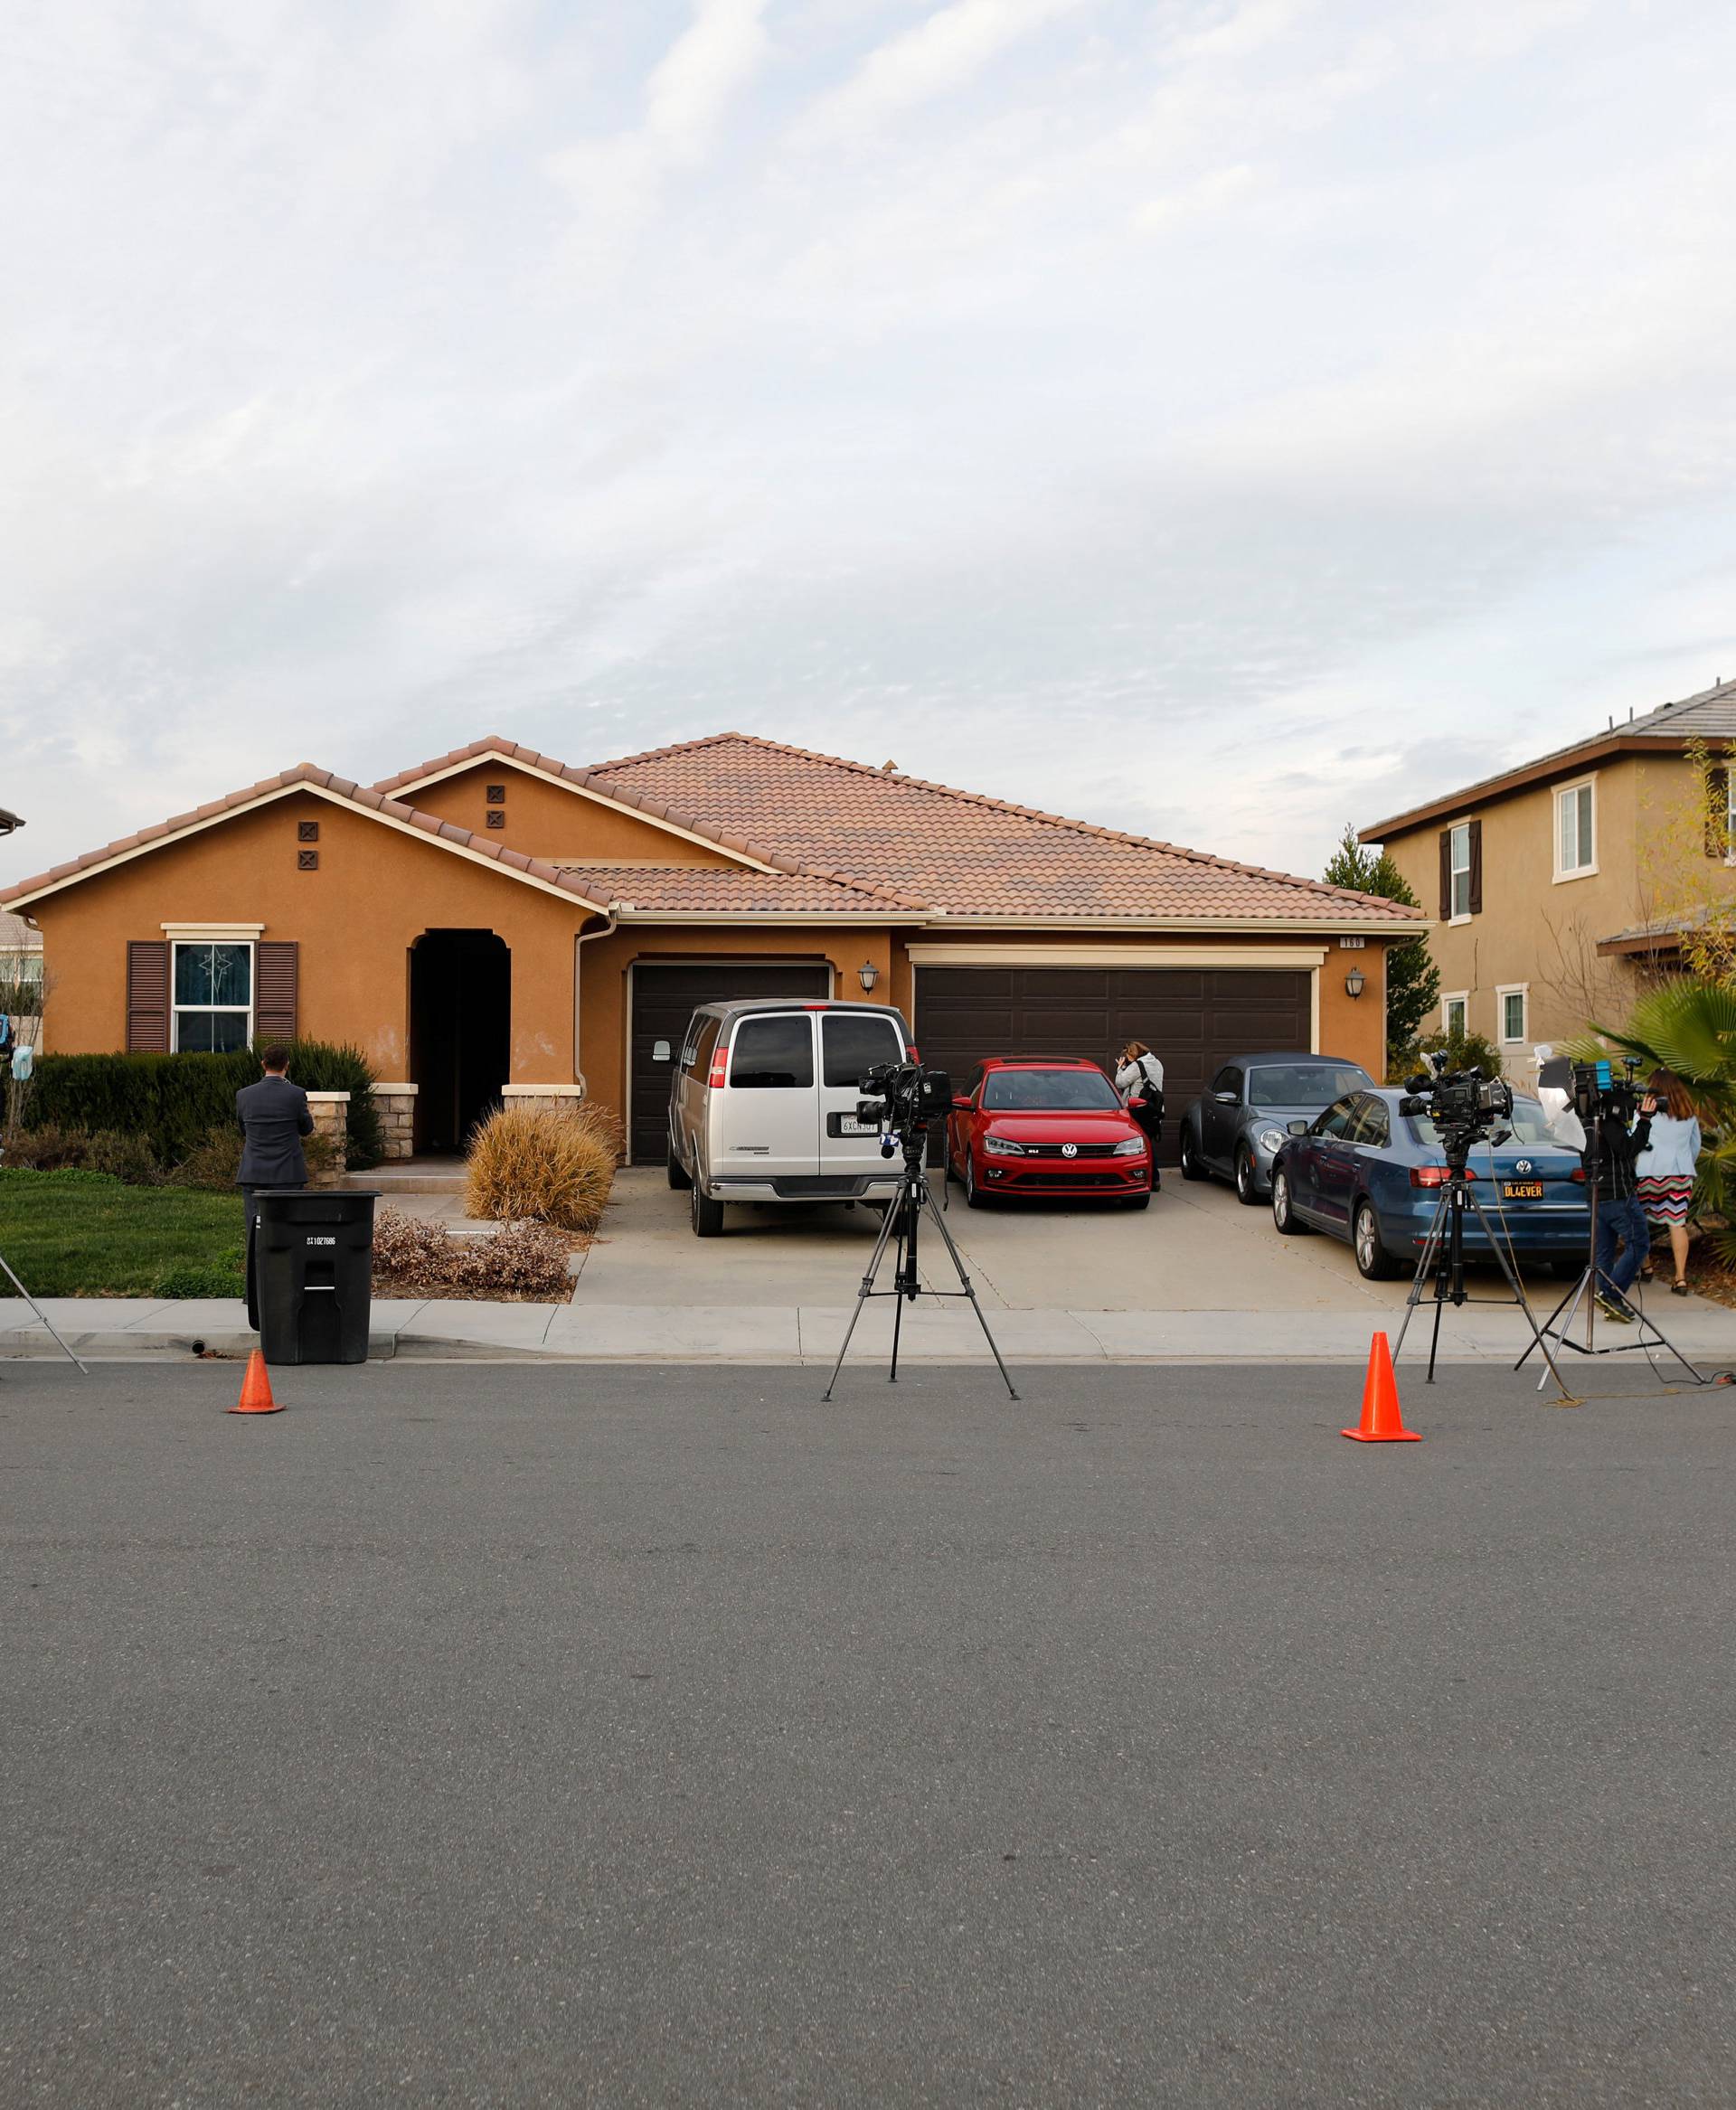 Members of the news media are parked outside the home of the Turpins in Perris